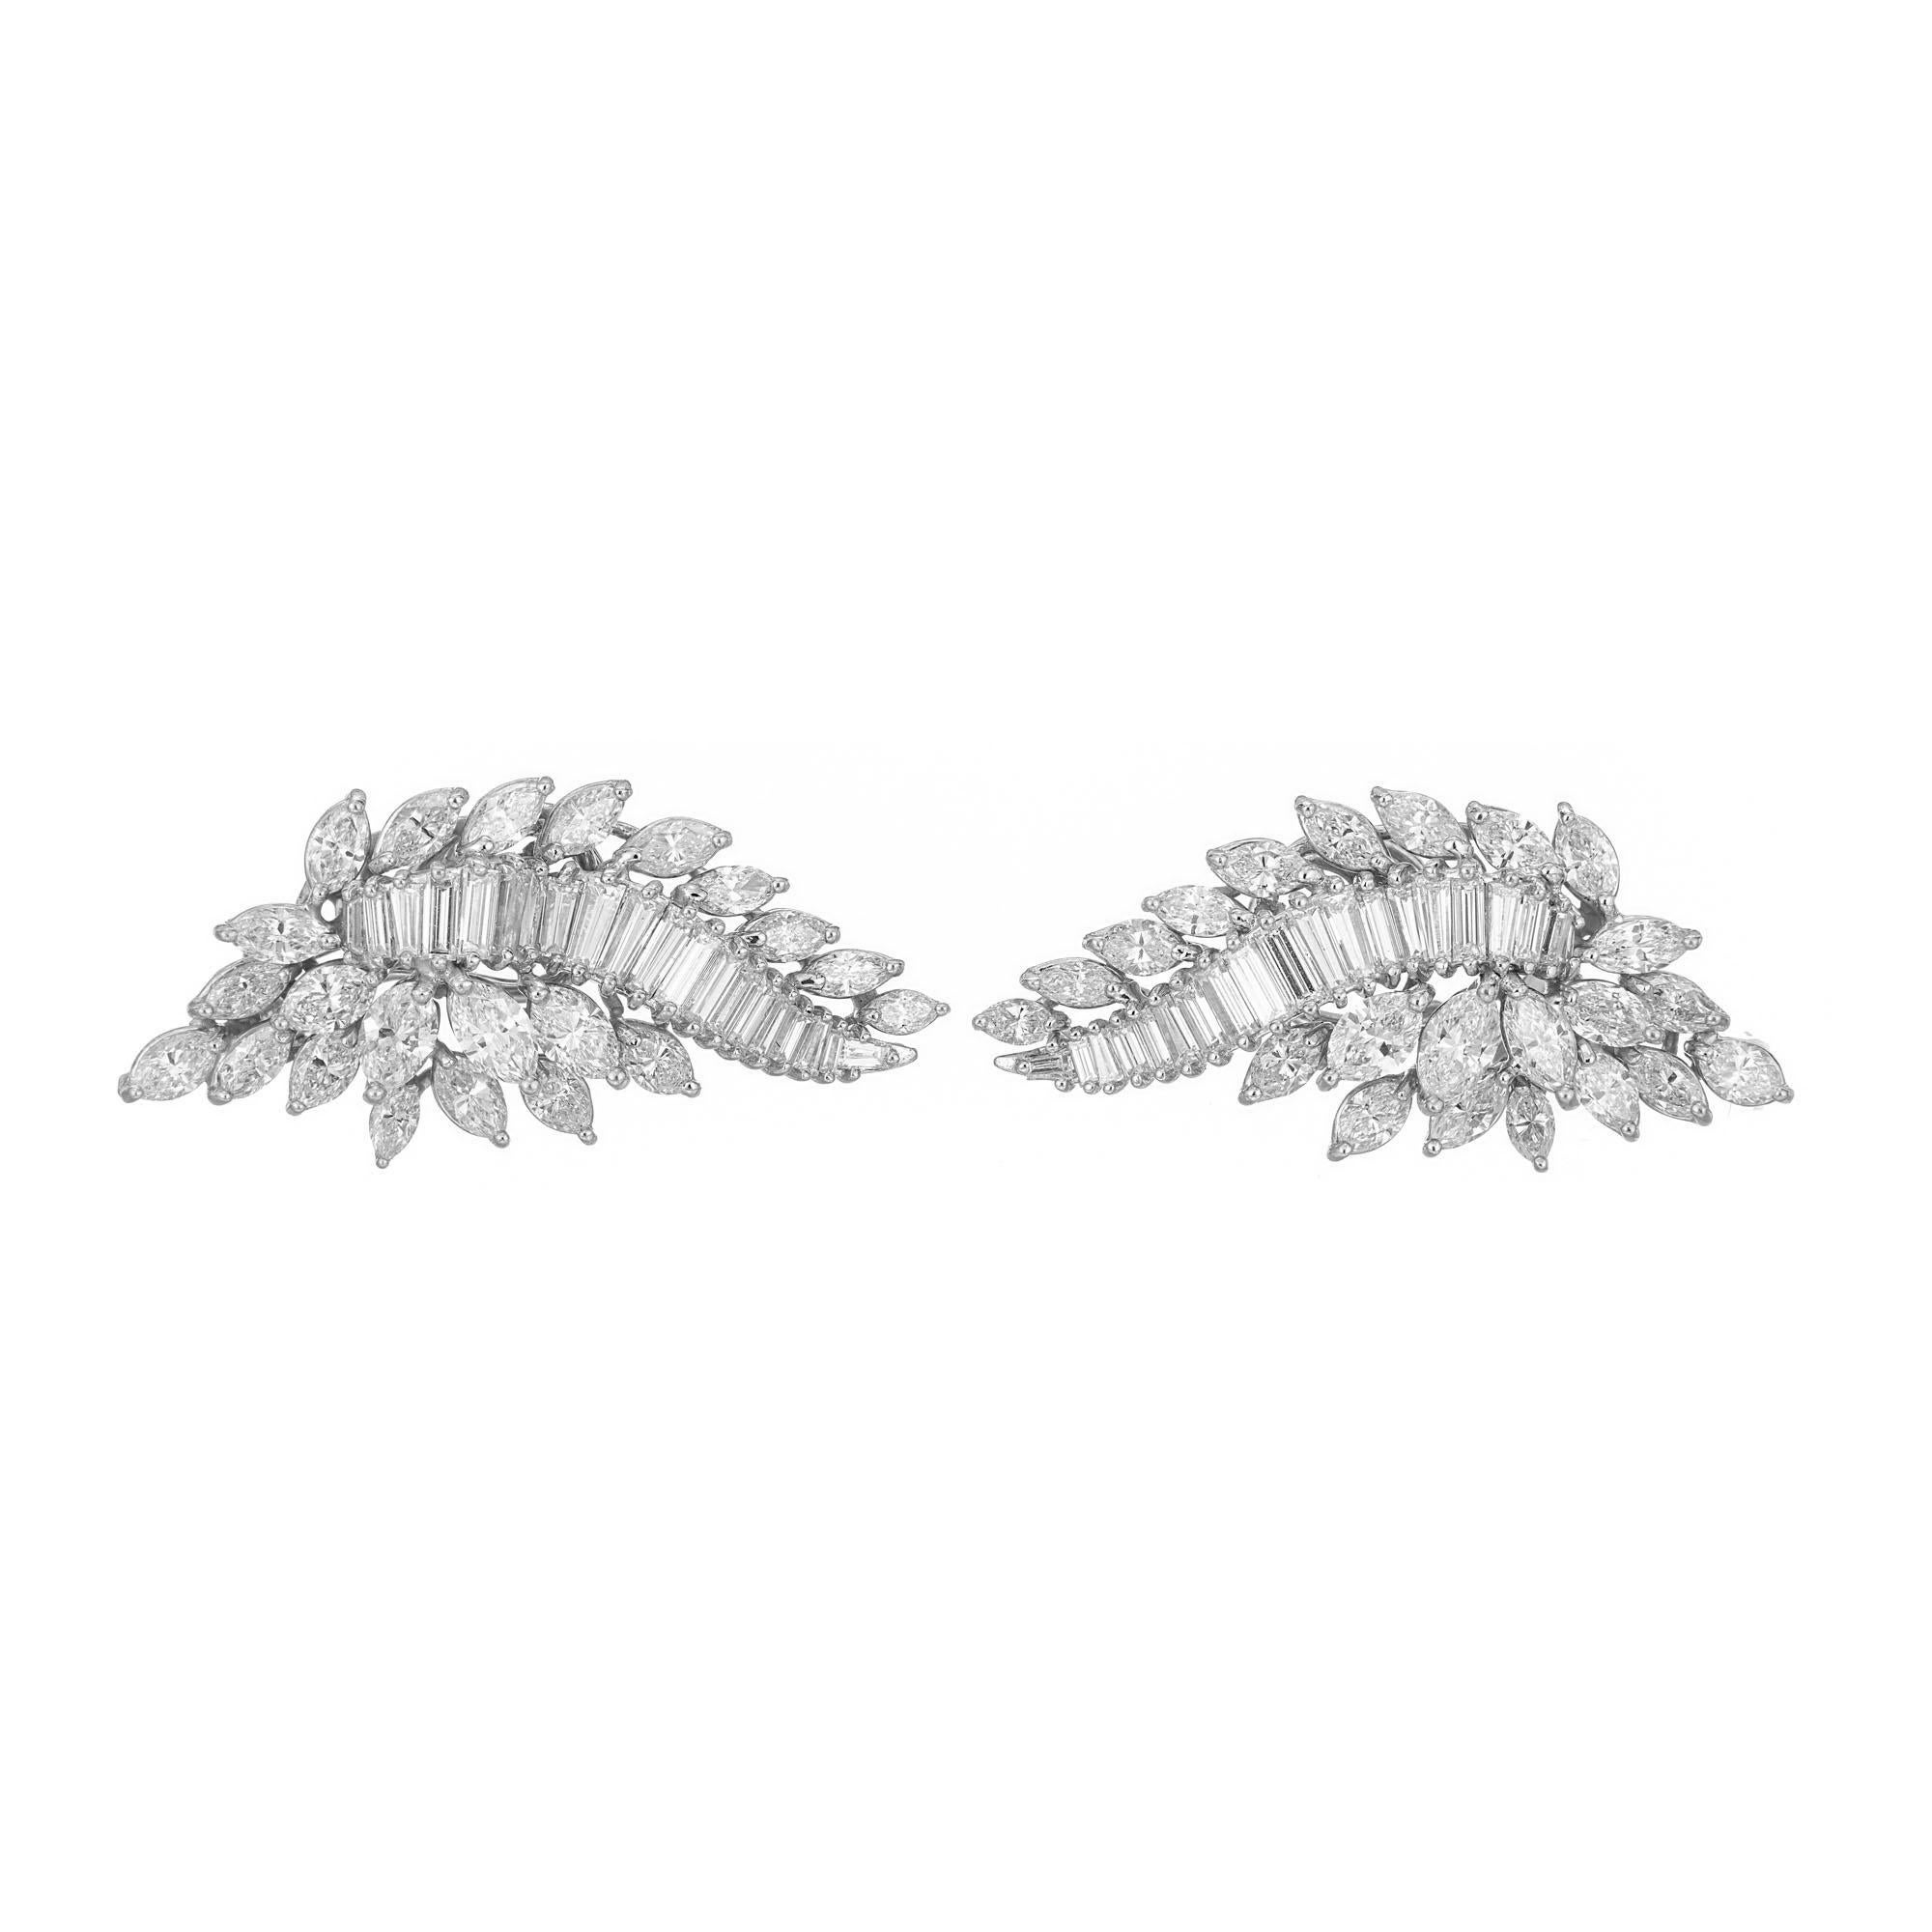 Vintage 1950's Spray design diamond cluster clip post earrings in platinum with white gold omega clip backs.  44 Marquise cut diamonds with 40 baguette cut diamonds totaling 9.00 carats. 

44 marquise diamonds, G VS
40 baguette cut diamonds, G